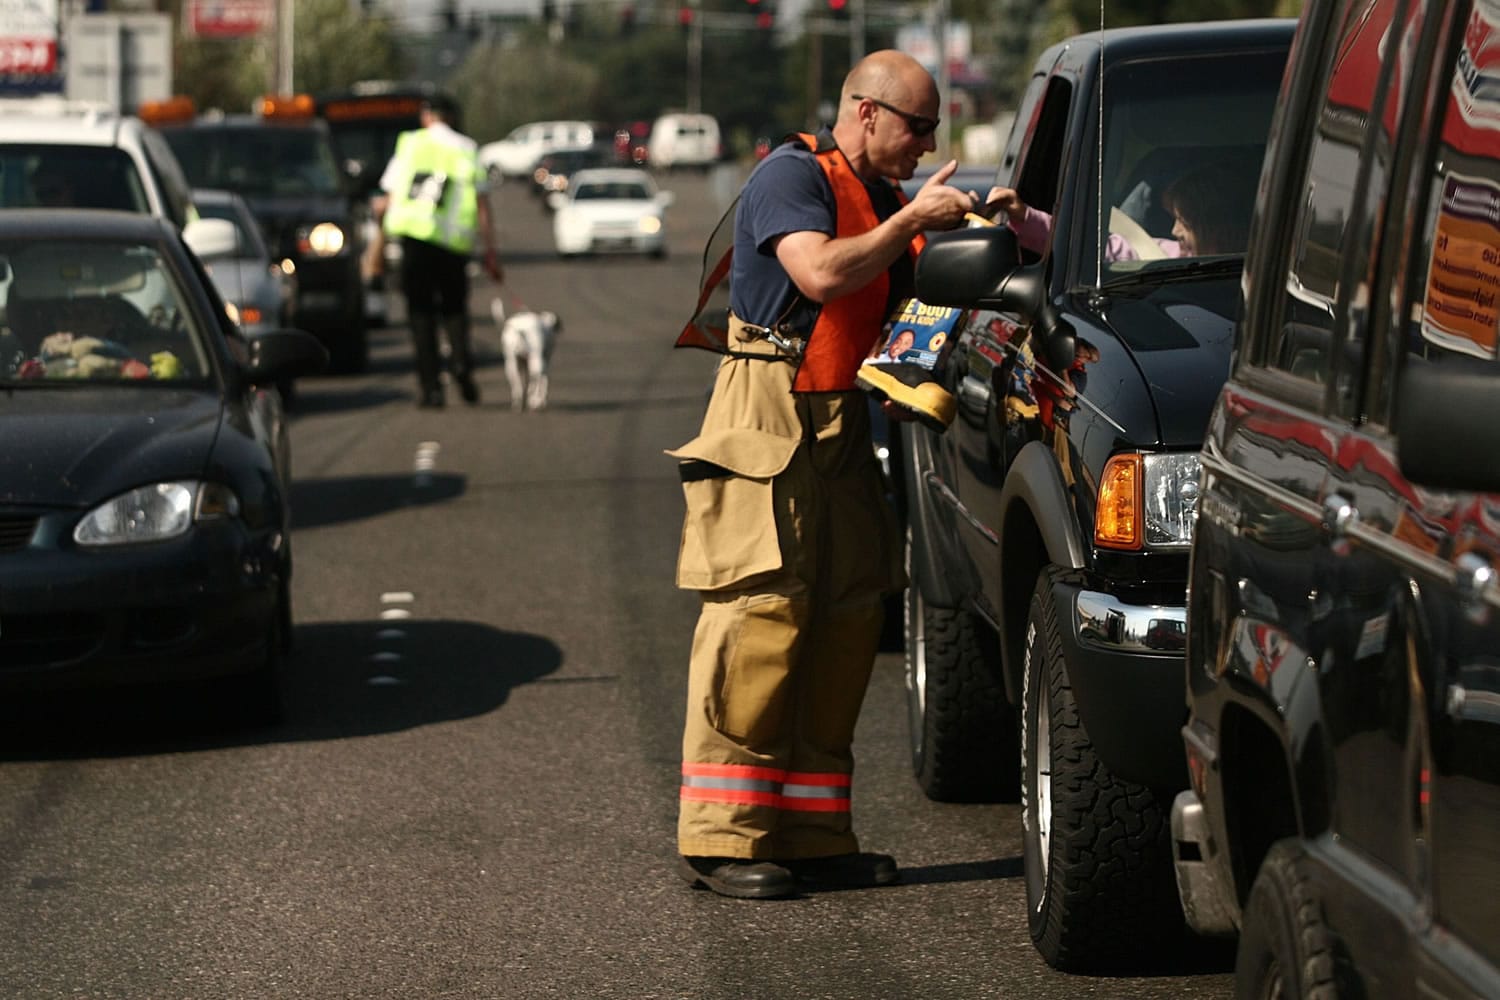 Vancouver's firefighters union set a fundraising record for its Fill the Boot campaign last week.